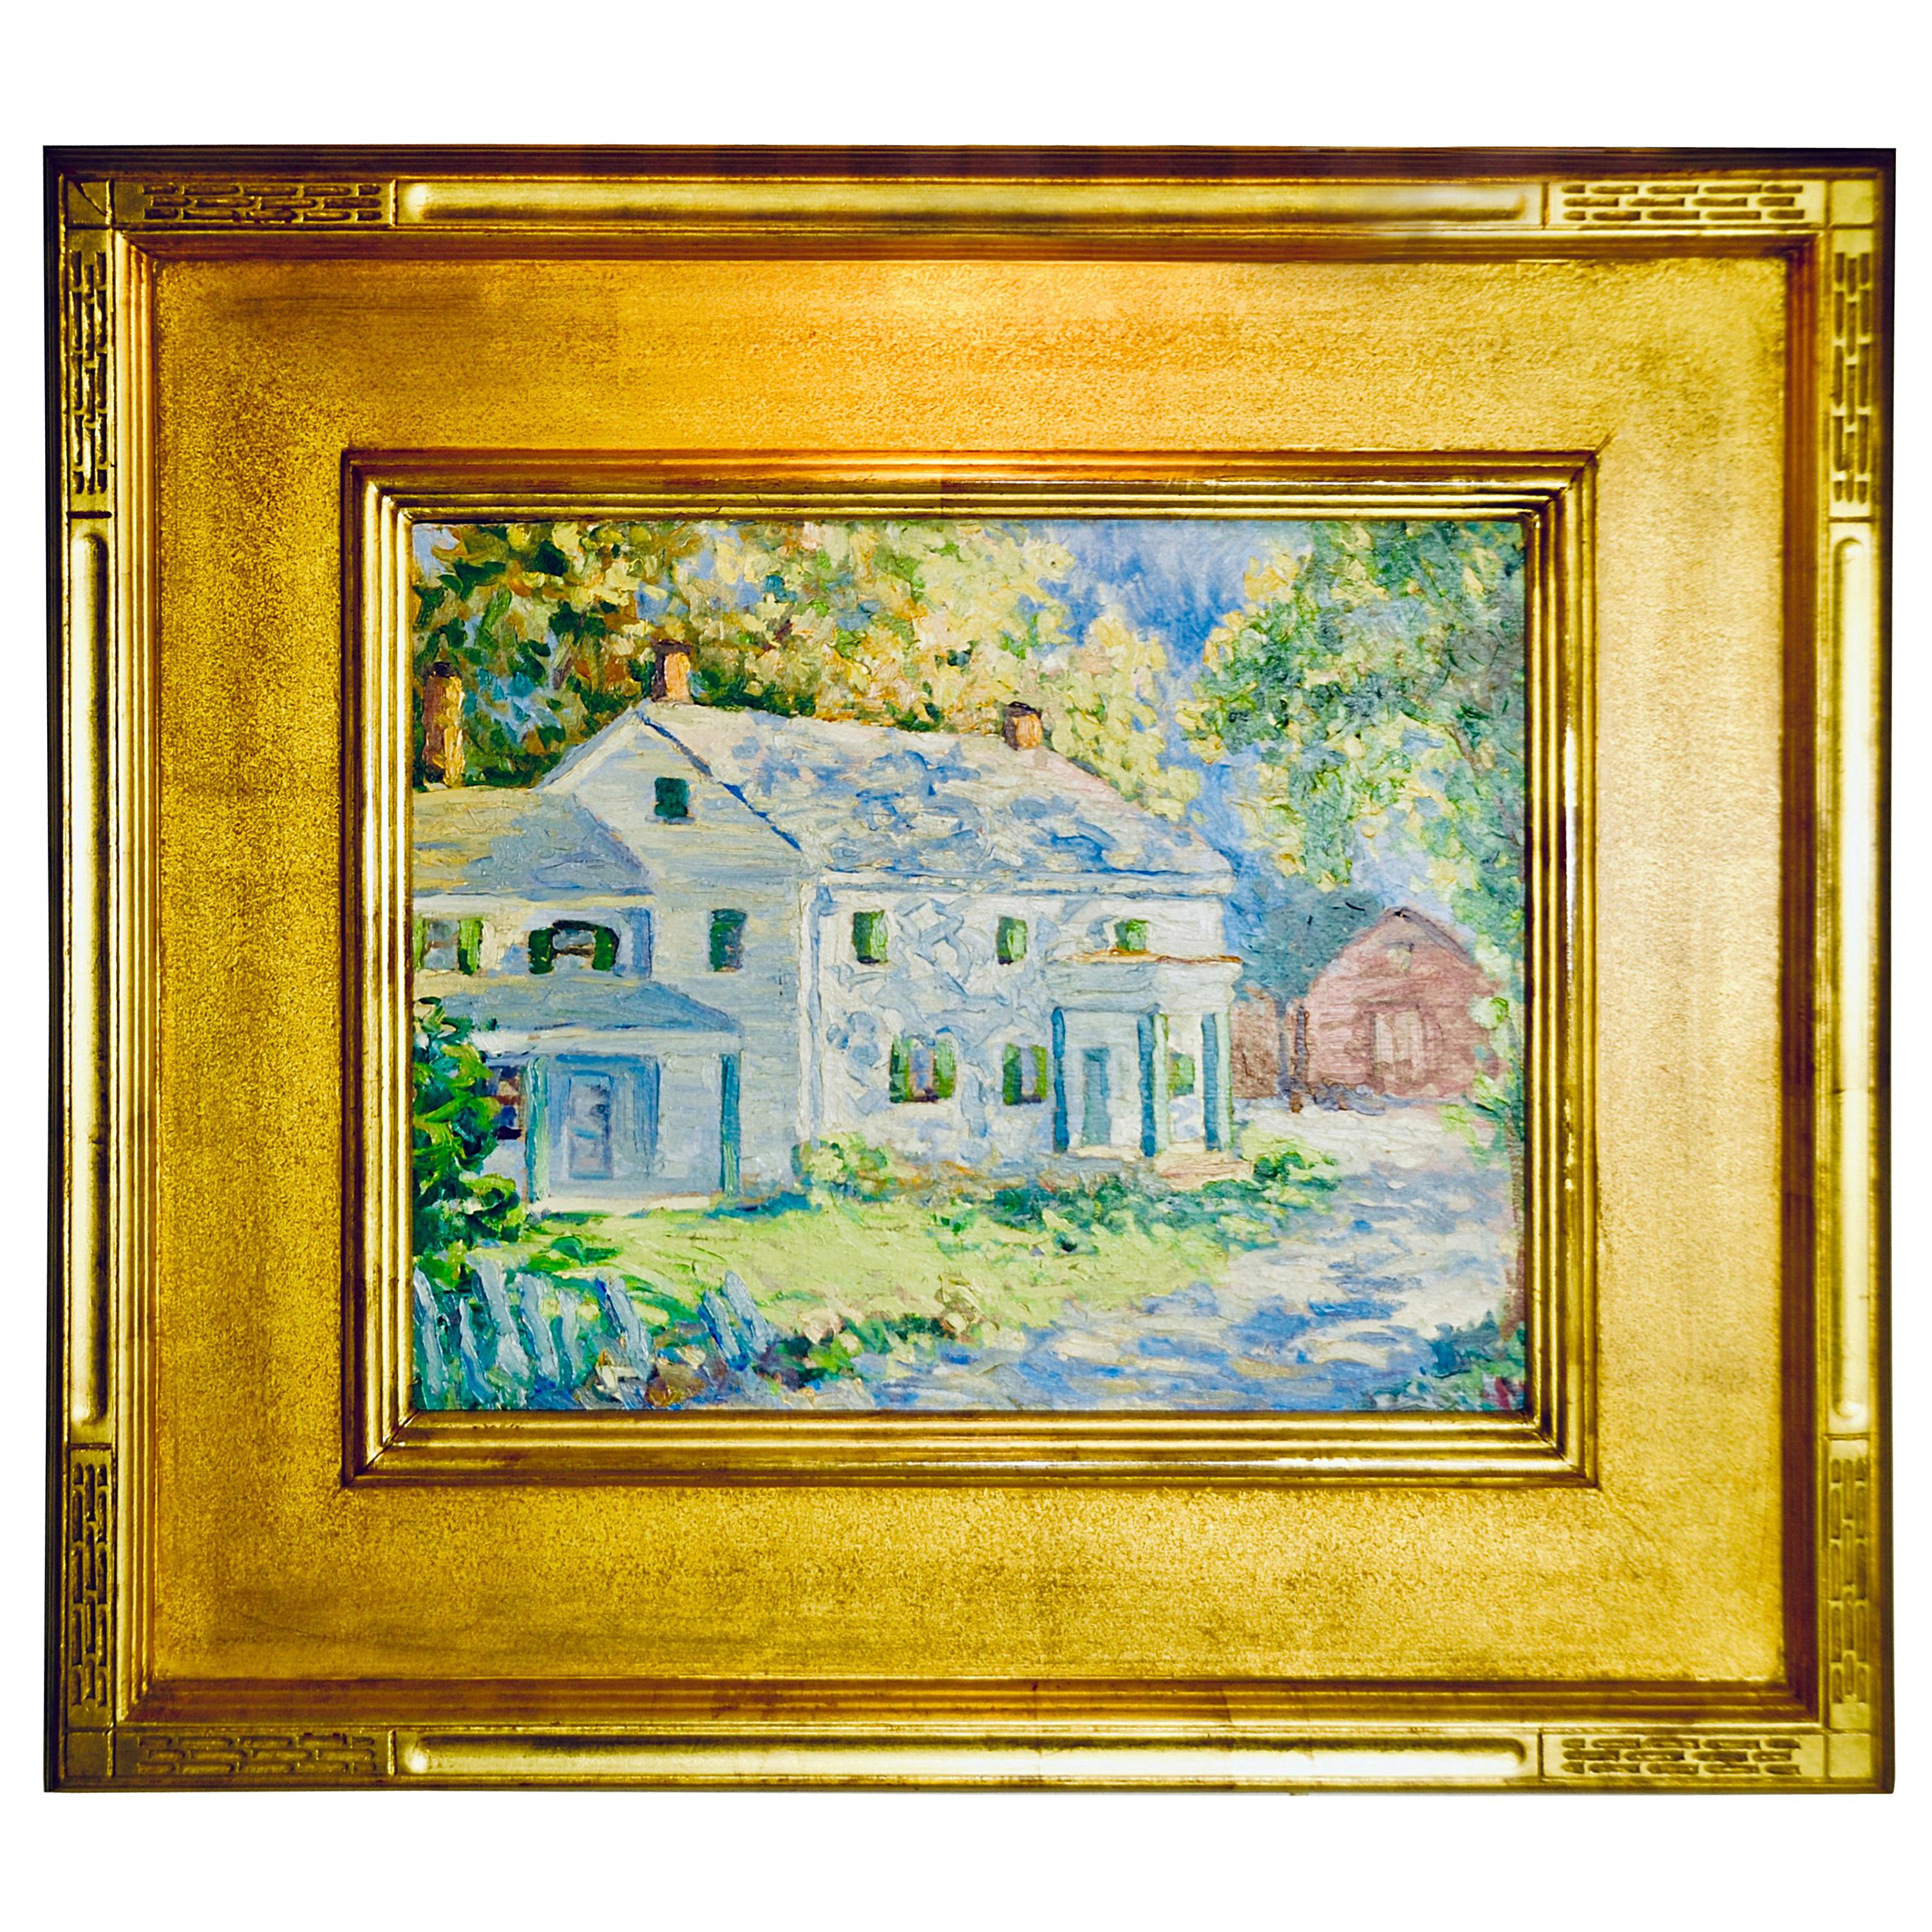 Walter Mattern "Family Home" Oil on Canvas For Sale